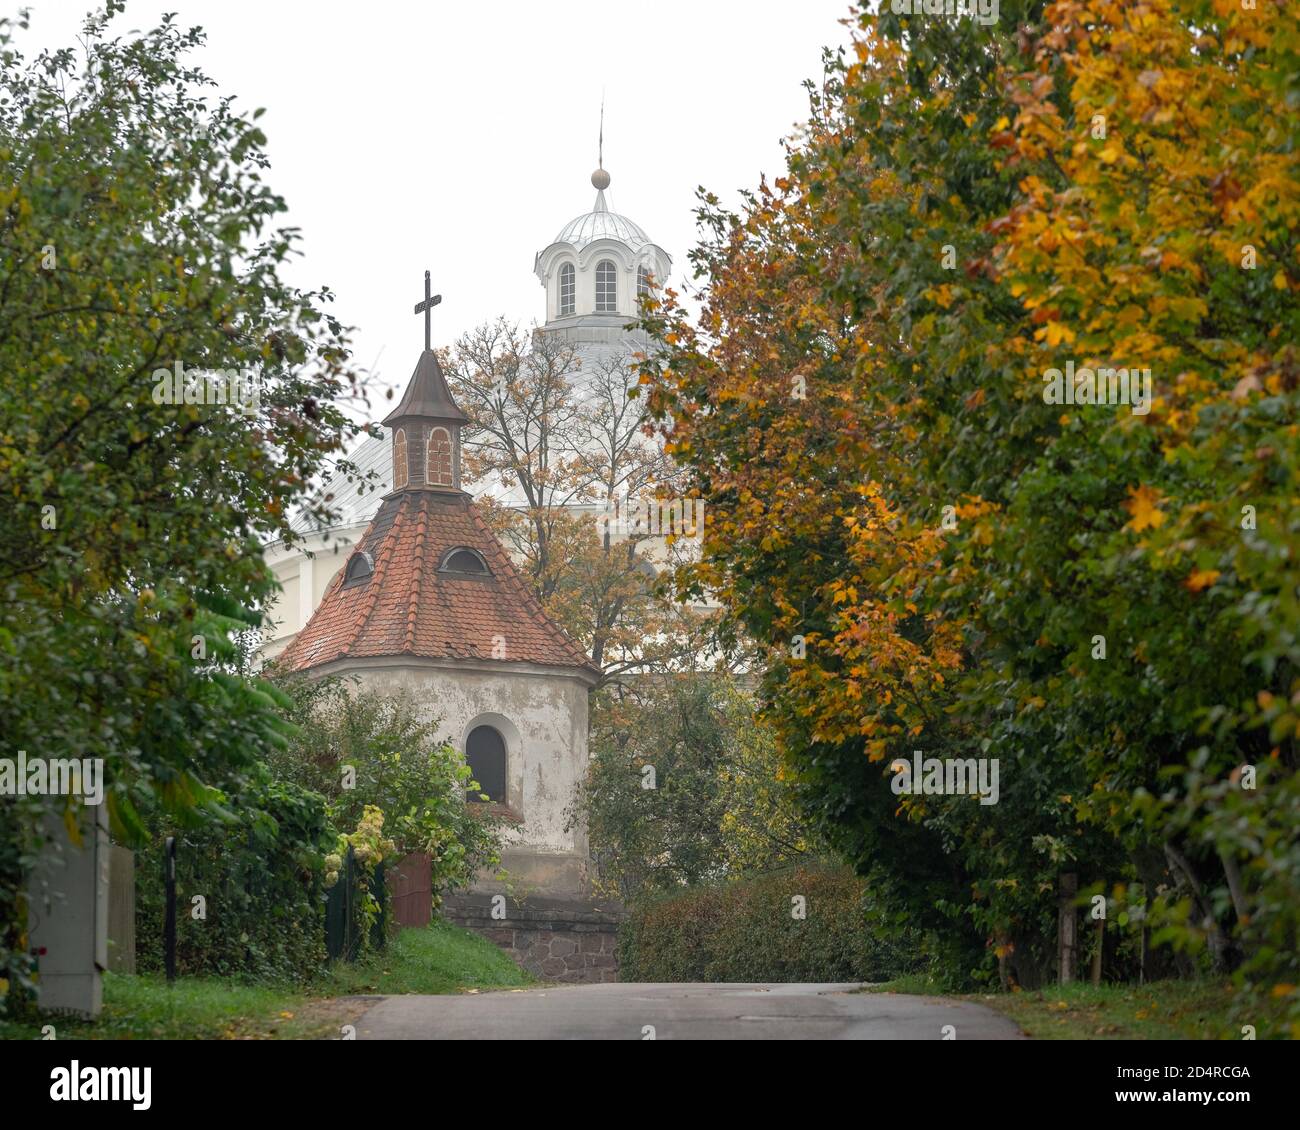 The street through the town of Sudervė in Lithuania towards the bell tower of the Holy Trinity Church on a foggy autumn morning Stock Photo